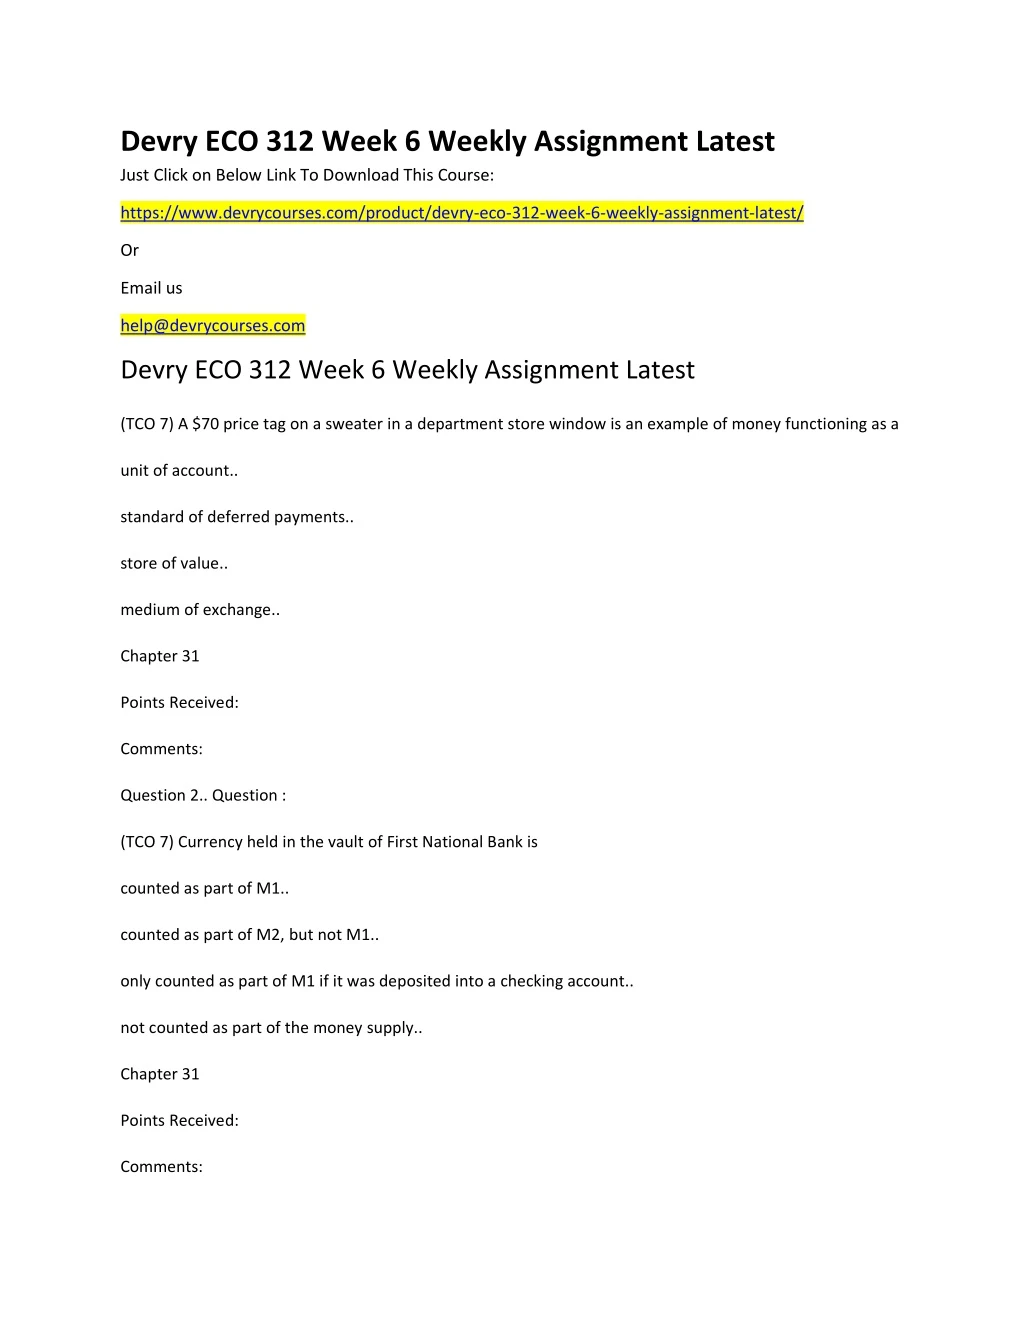 devry eco 312 week 6 weekly assignment latest